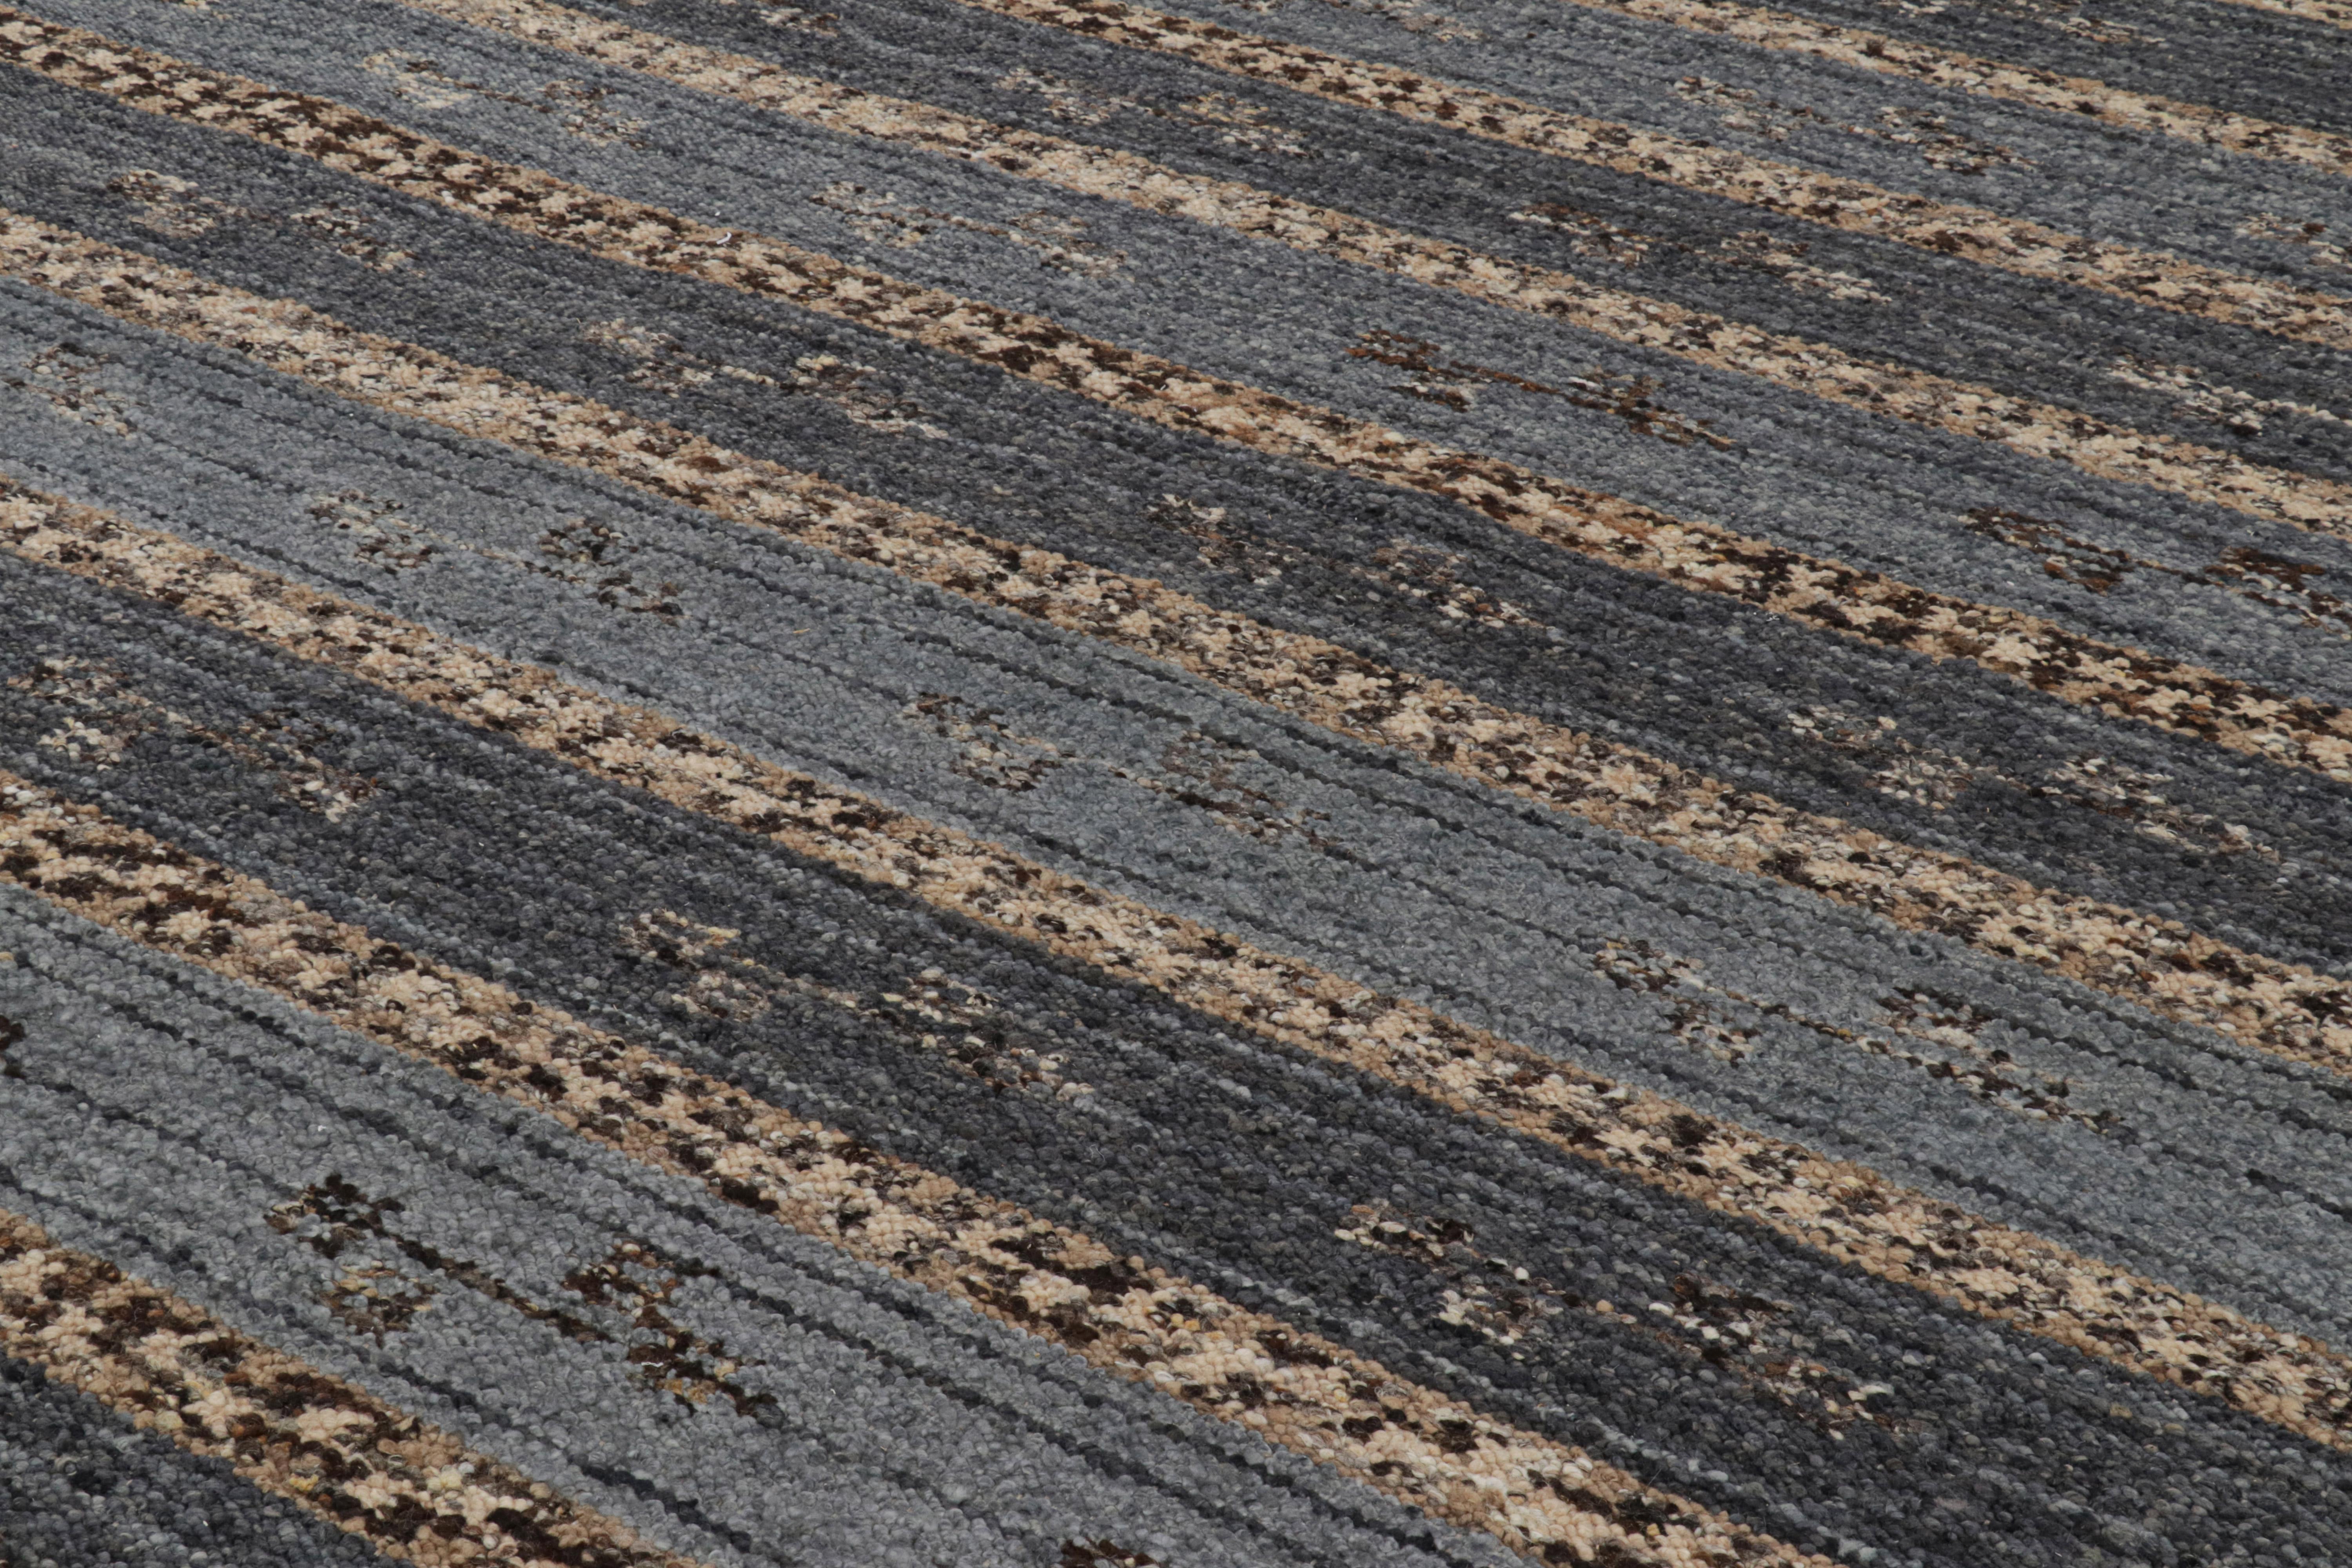 Handwoven in wool, this smart 9x12 Swedish style flat weave is Rug & Kilim’s “Nu” texture in their Scandinavian rug collection. 

On the design: 

Our “Nu” flat weave enjoys a boucle-like texture of blended yarns, and a look both impressionistic and